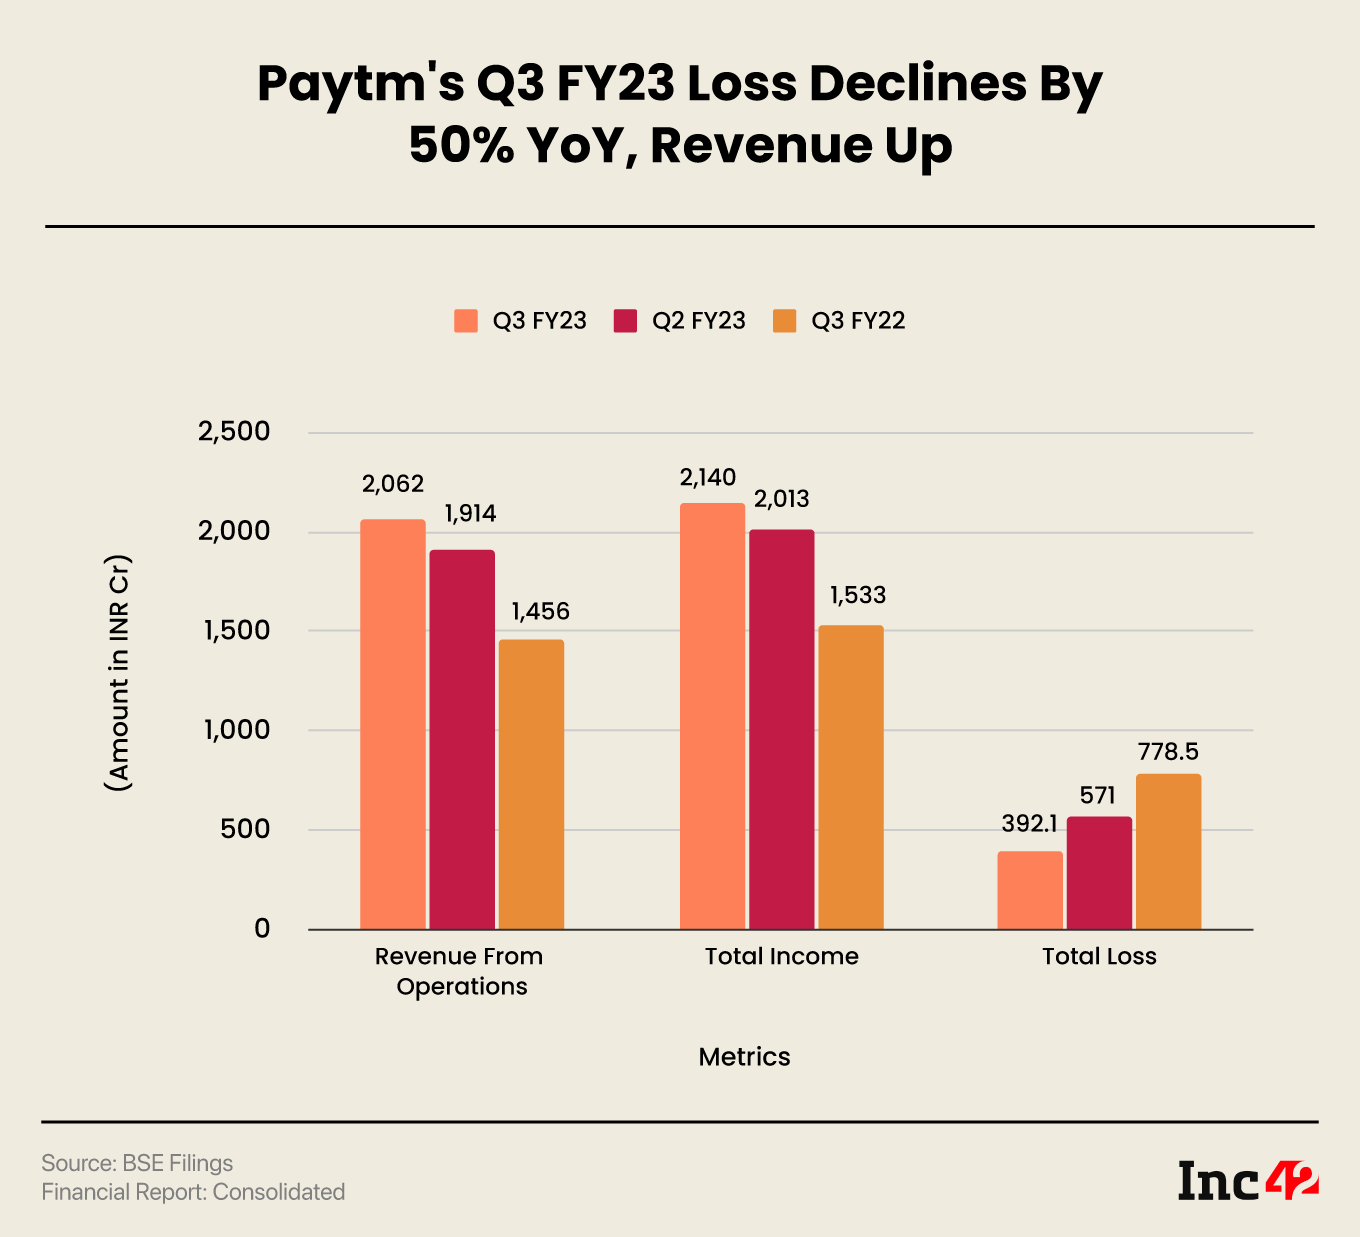 One97 Communications’, the parent company of fintech giant Paytm, net loss declined approximately 50% year-on-year (YoY) to INR 392.1 Cr in the third quarter (Q3) of the financial year 2022-23 (FY23)